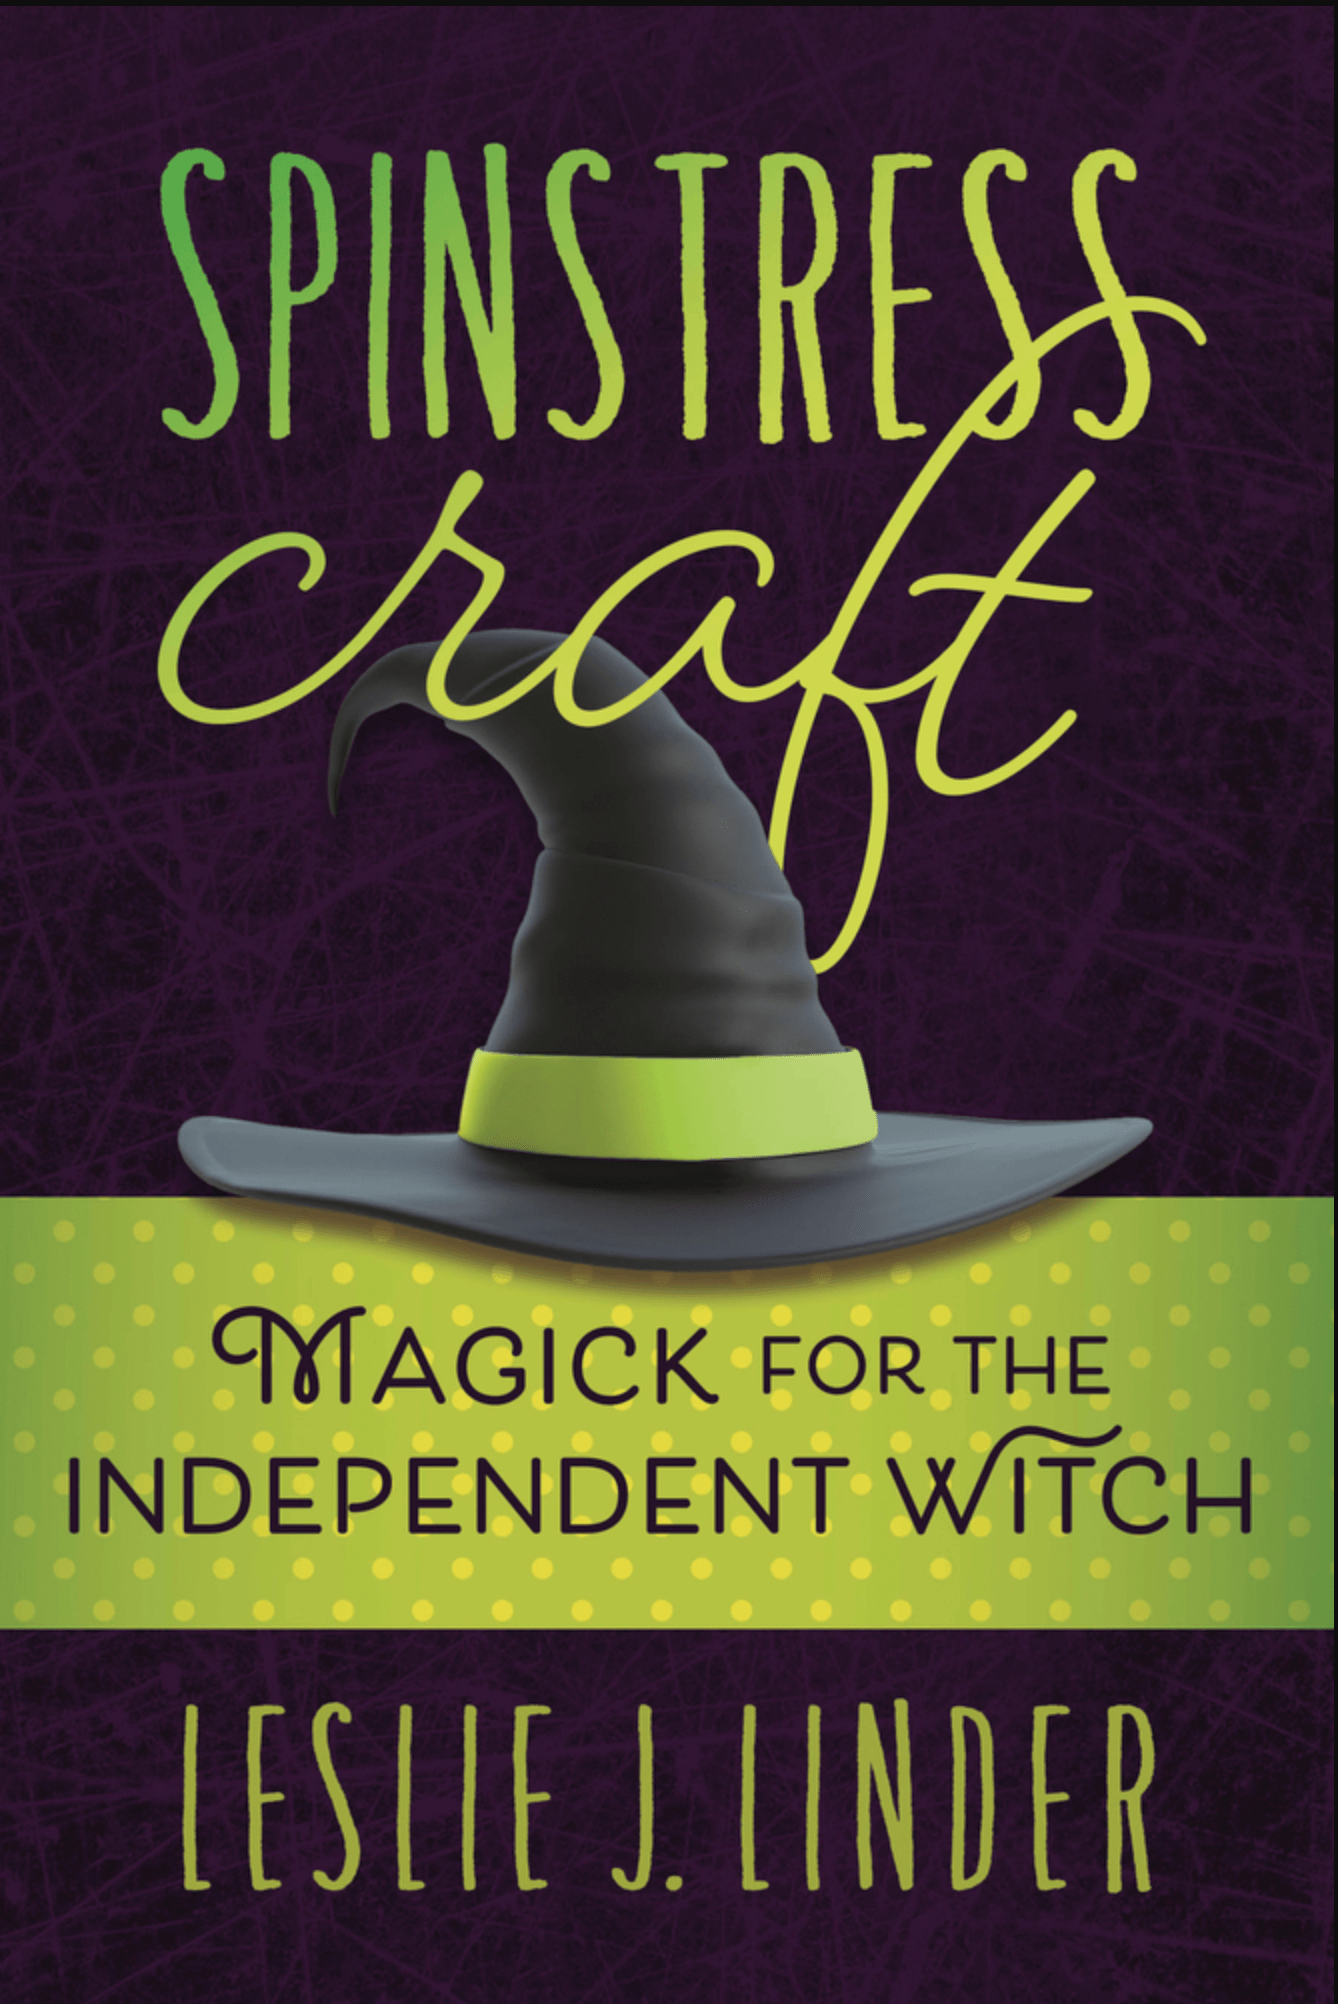 Spinstress Craft | Magick for the Independent Witch - Spiral Circle